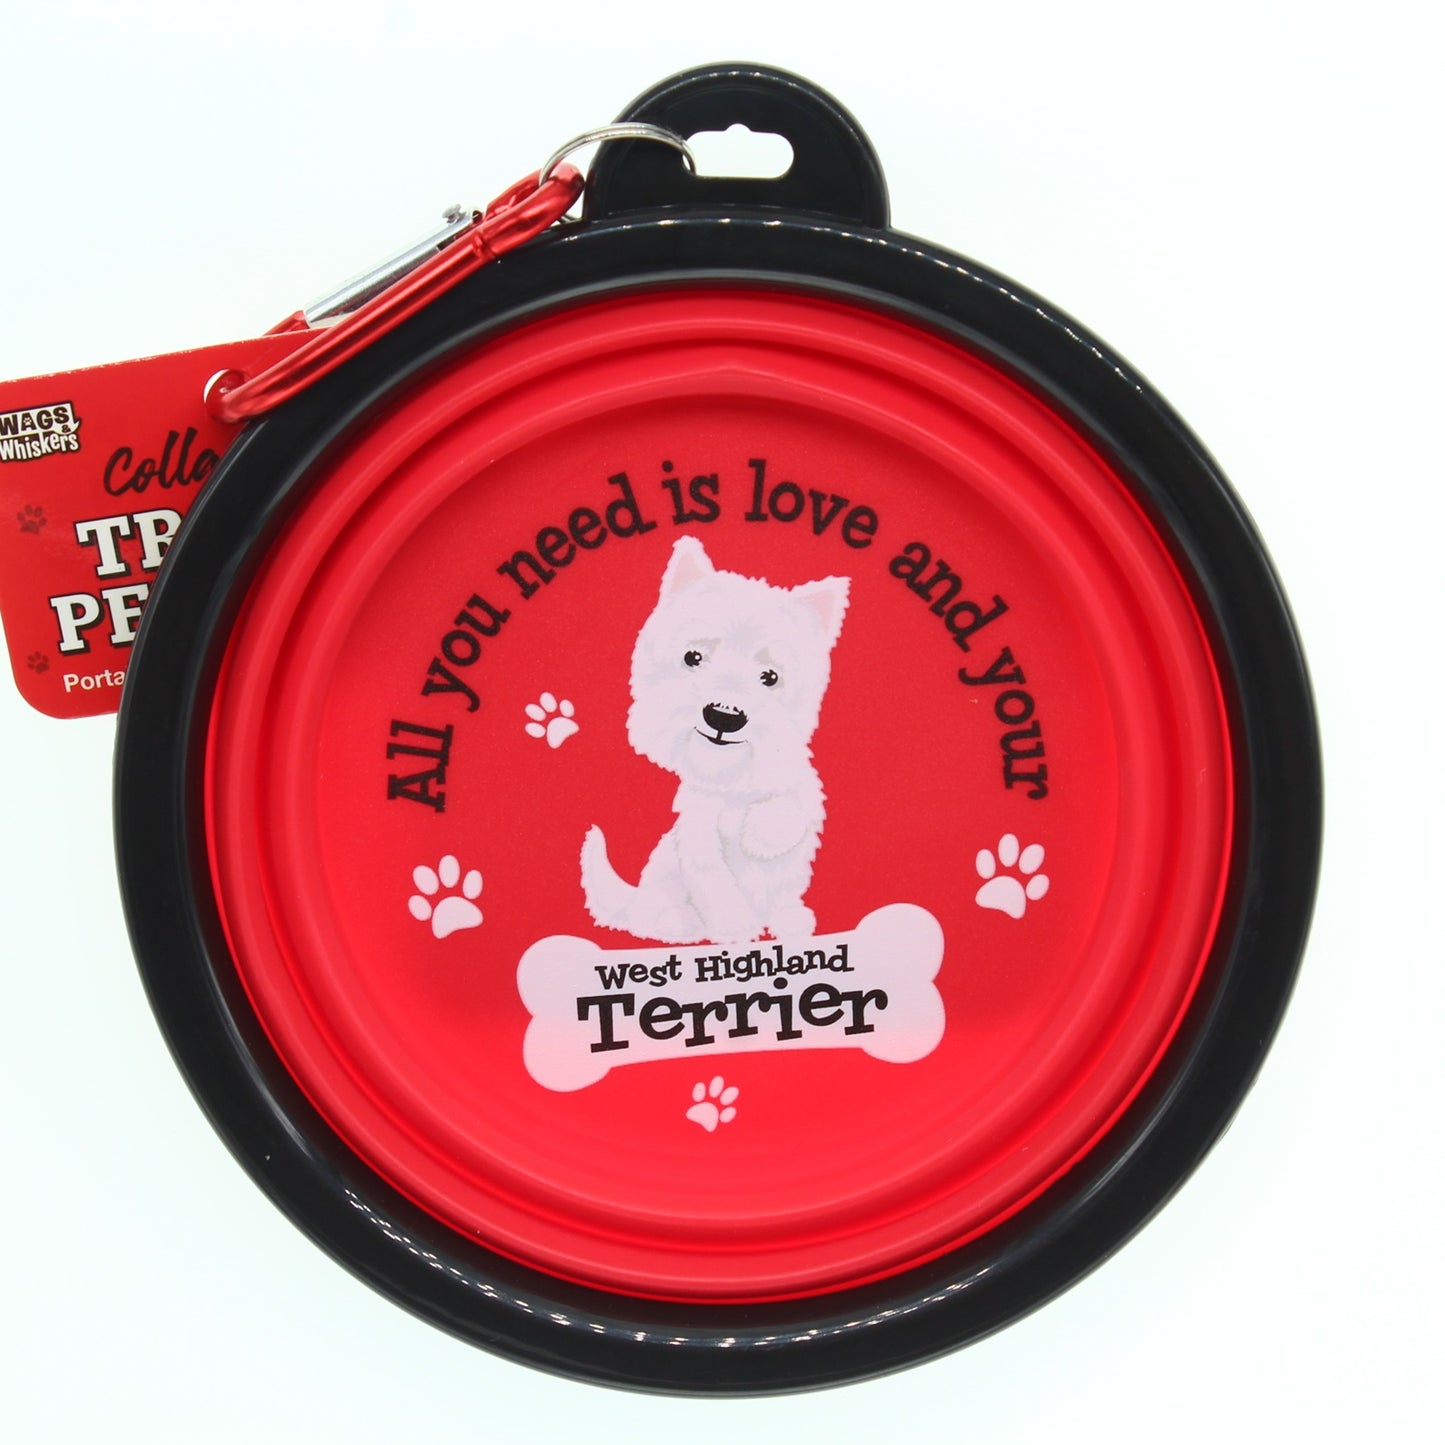 WEST HIGHLAND TERRIER COLLAPSIBLE TRAVEL DOG BOWL GIFT